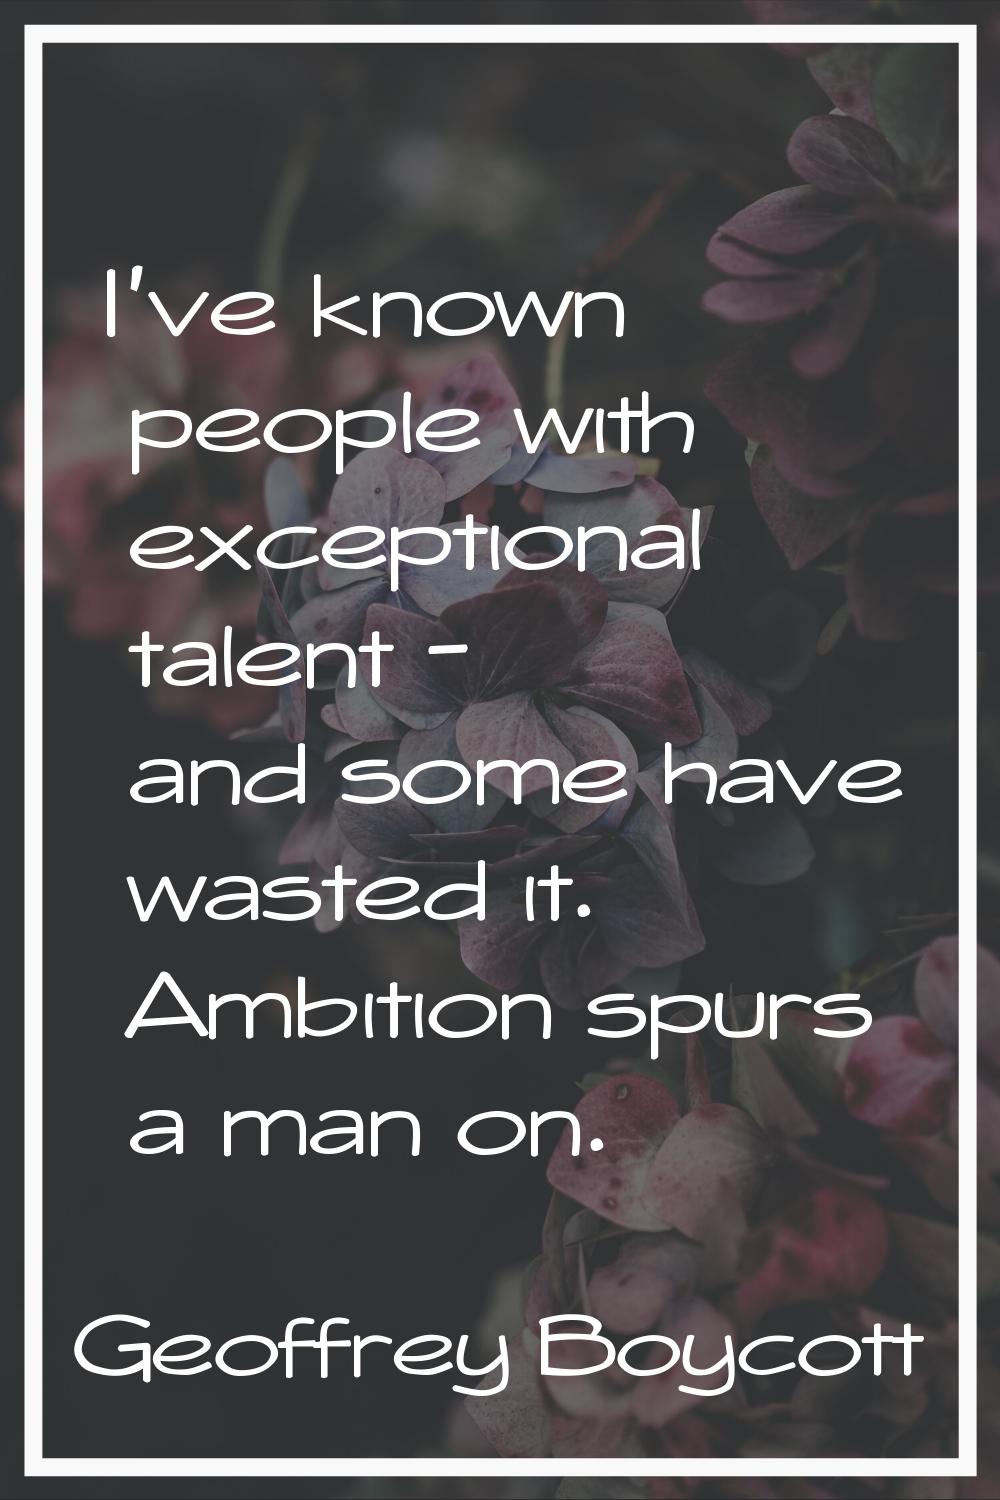 I've known people with exceptional talent - and some have wasted it. Ambition spurs a man on.